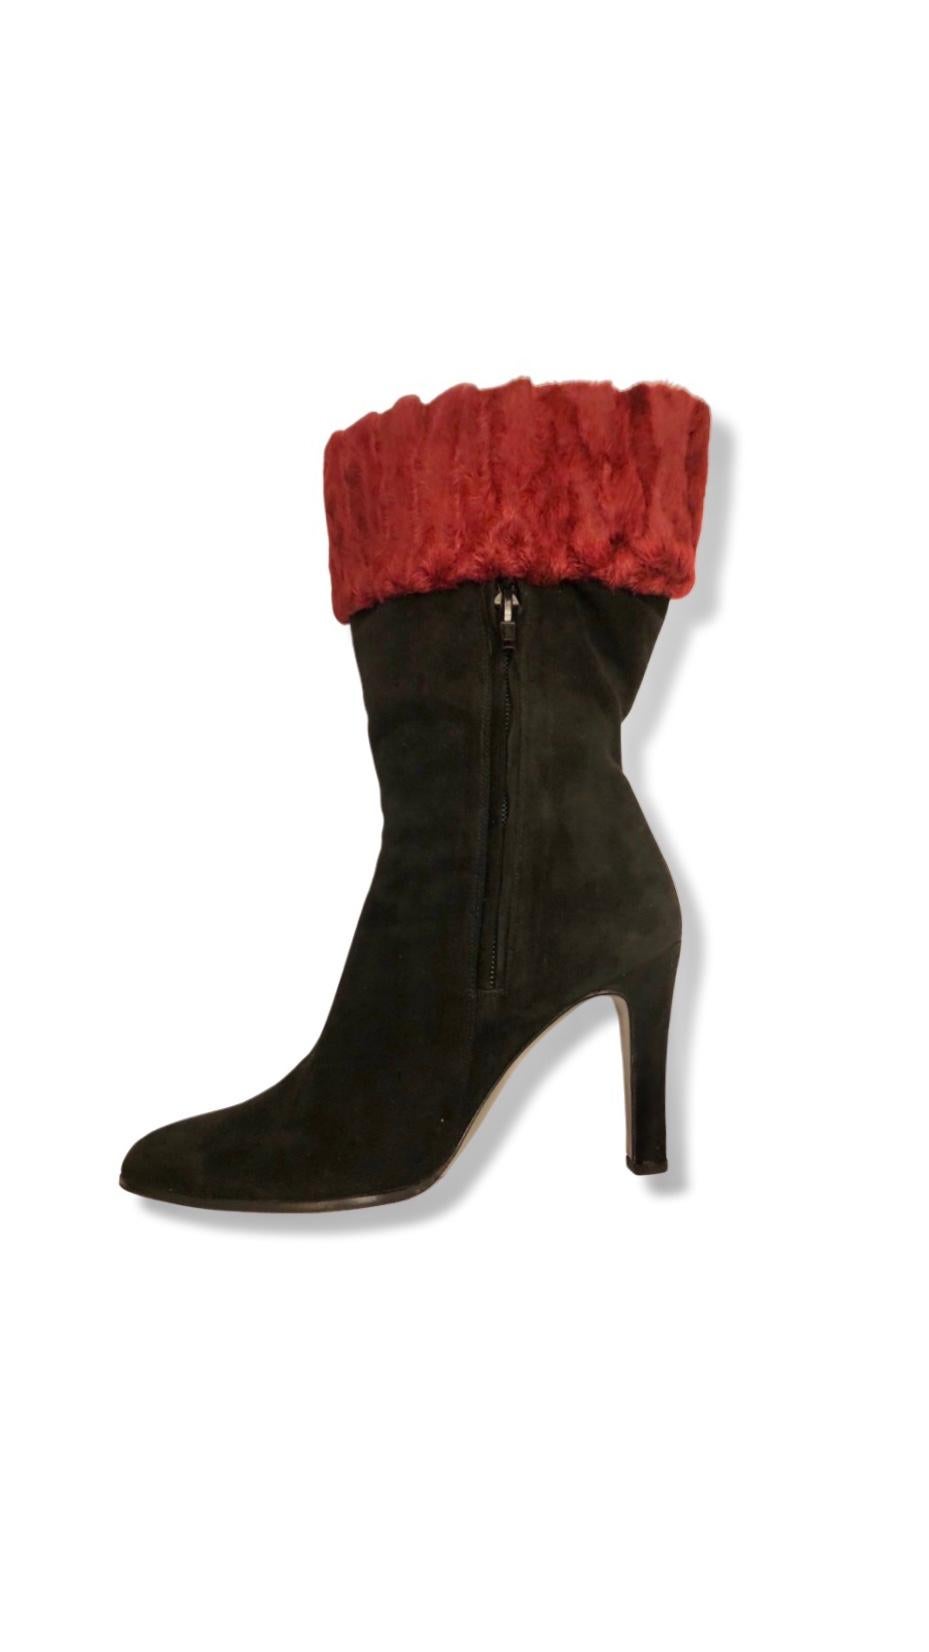 Chanel Black Suede with Red Fur Trim Ankle Boots  In Good Condition For Sale In Sheung Wan, HK